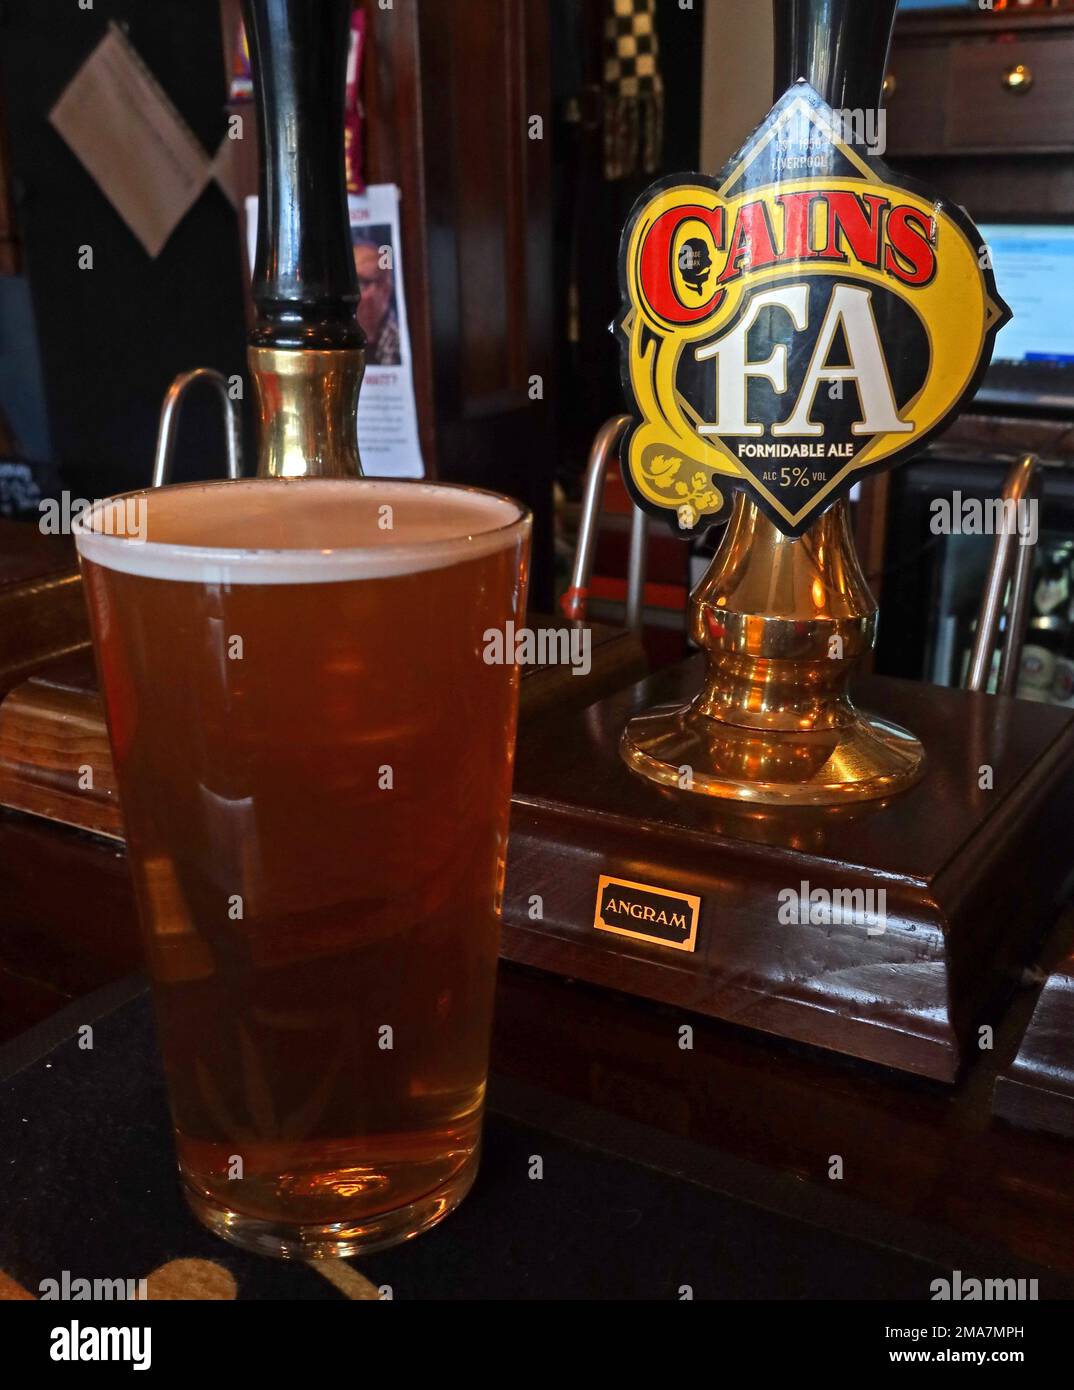 Cains FA Formidable Ale pump at Doctor Duncan's bar,St John's Ln, Queen Square, Liverpool,Merseyside,England,UK,L1 1HF Stock Photo